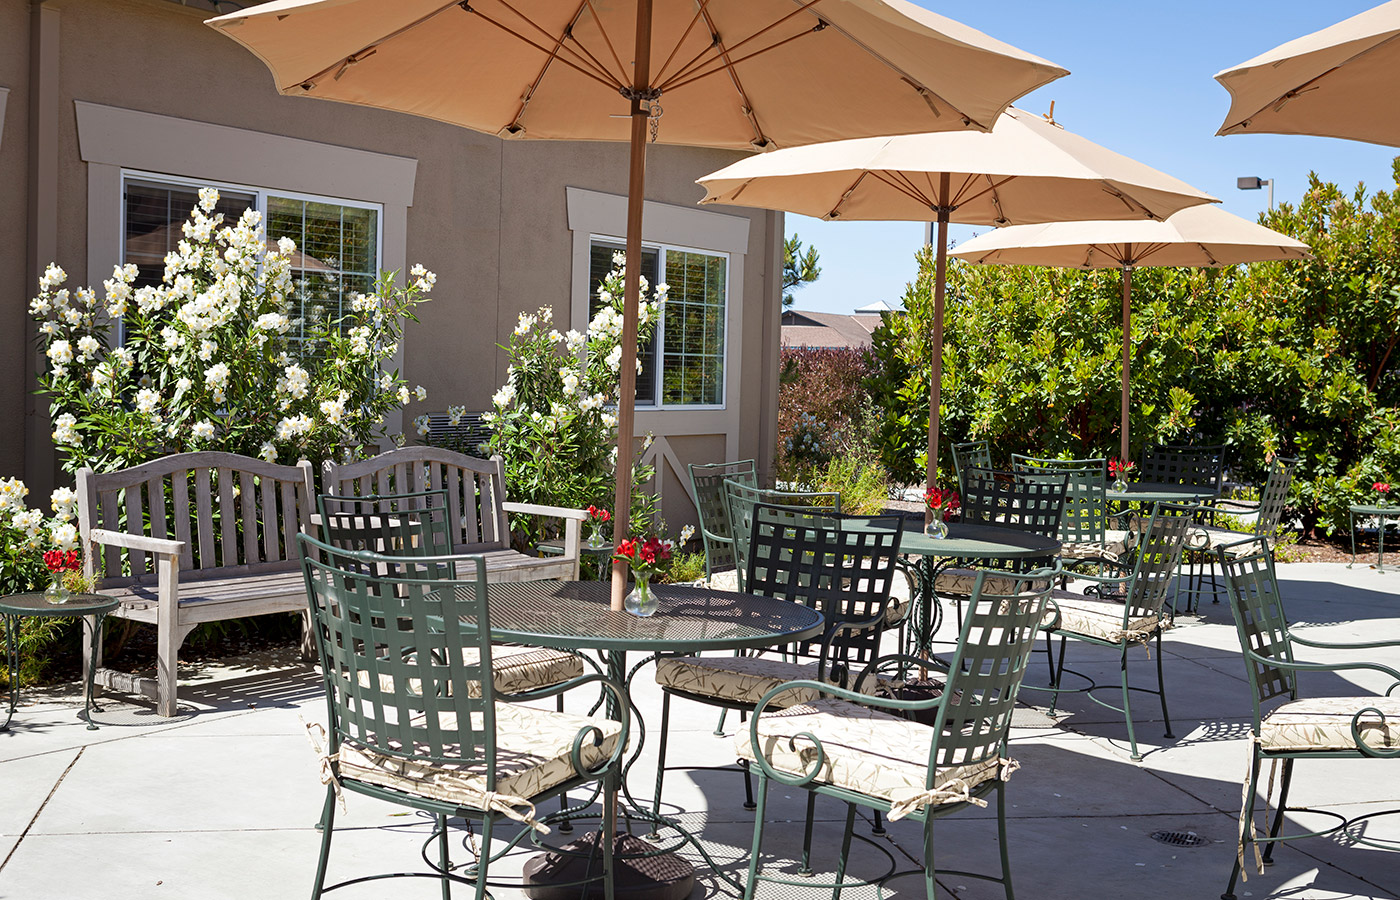 The patio area at The Cottages of Carmel.